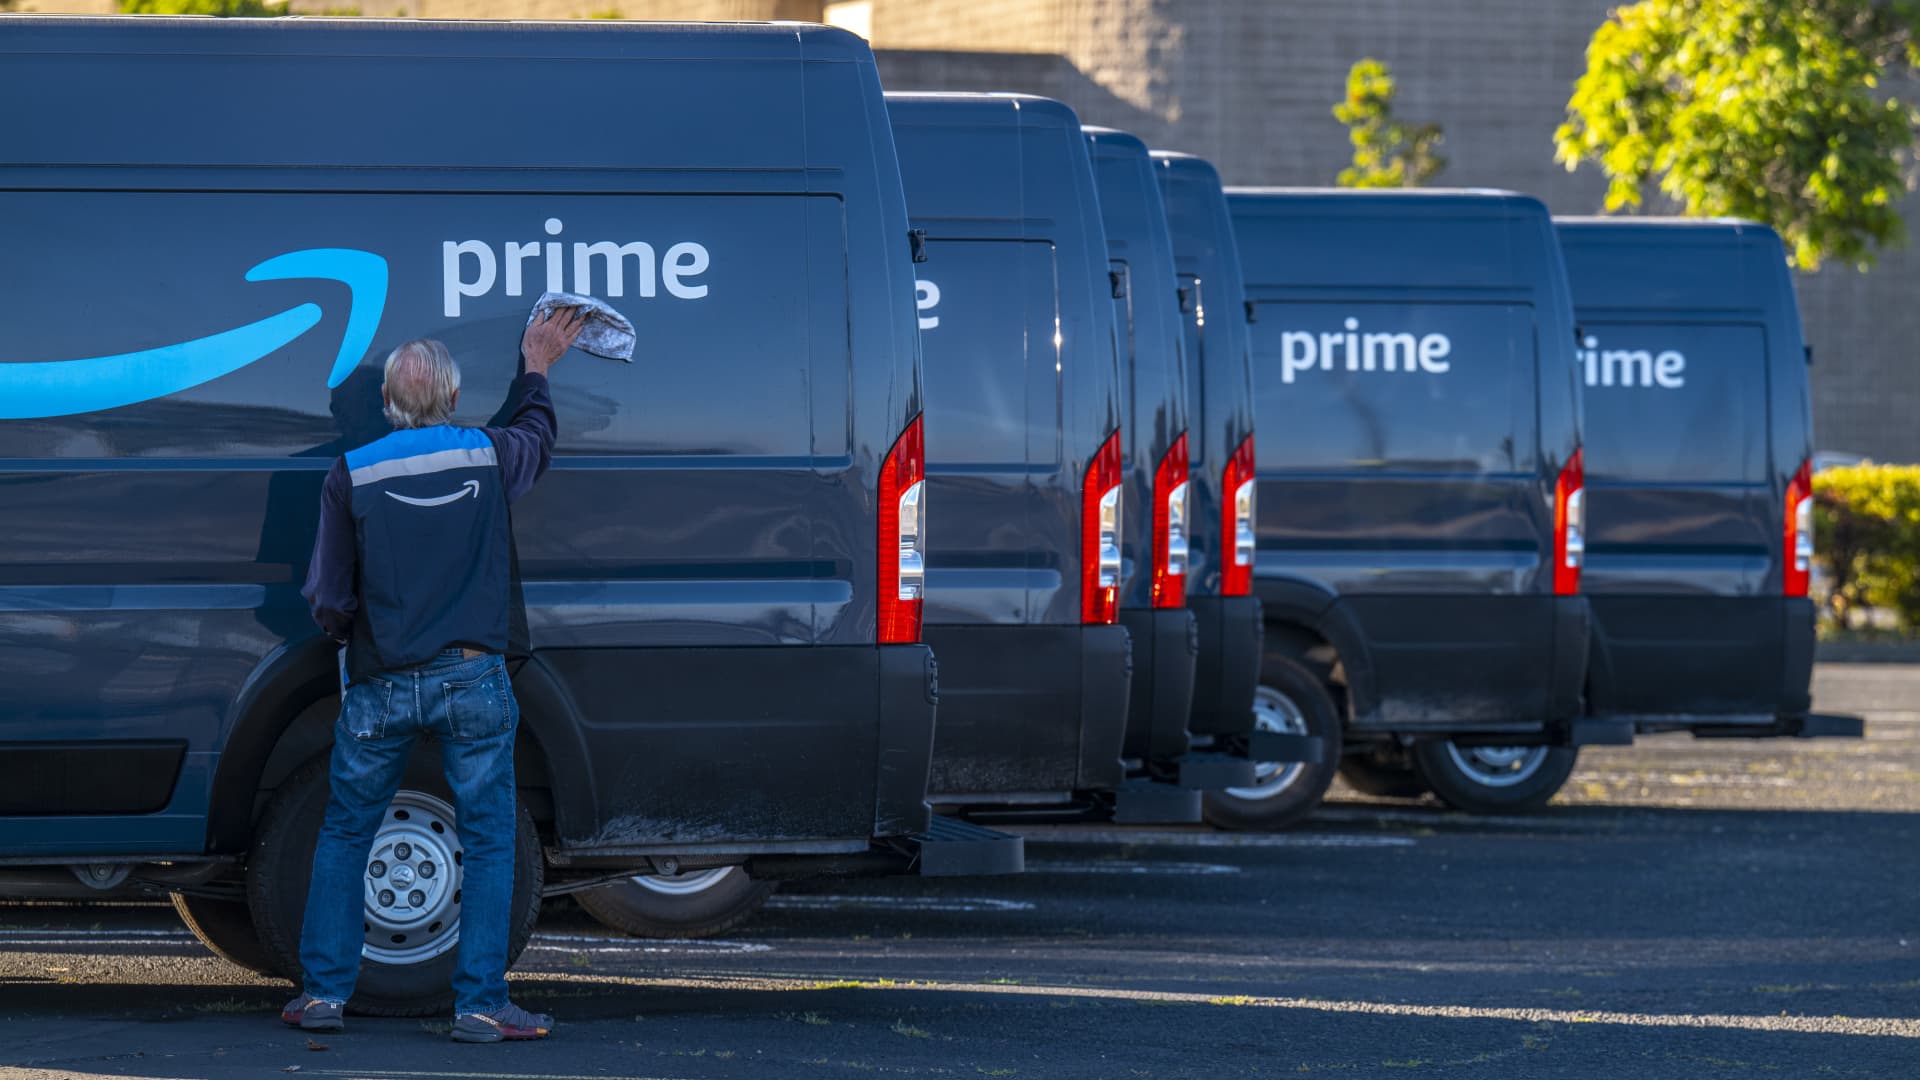 Amazon will have two Prime shopping events this year, second one coming in Q4